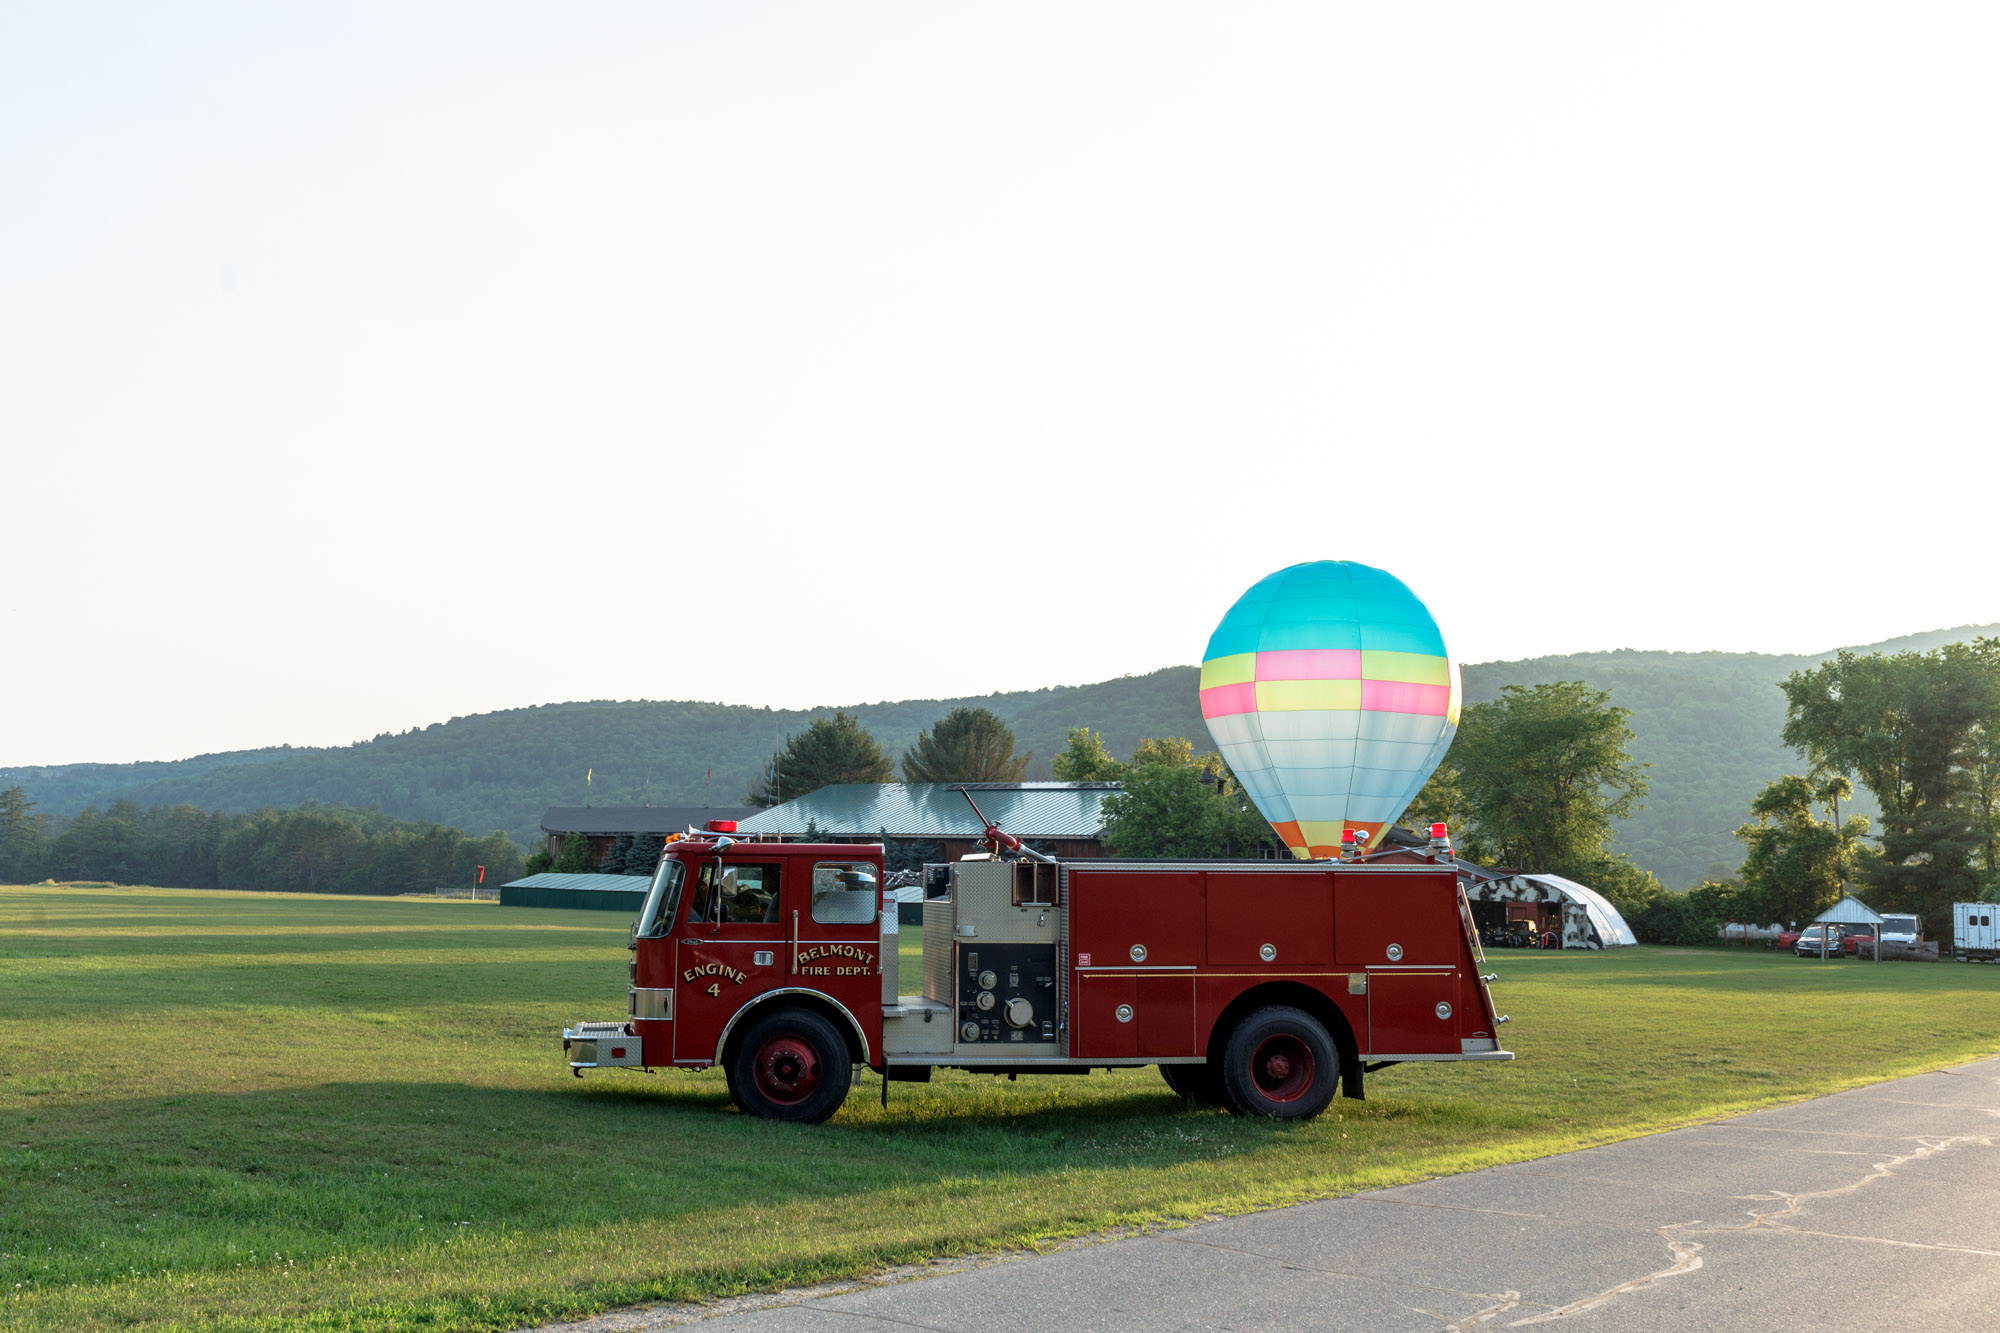 Fire Truck with Balloon